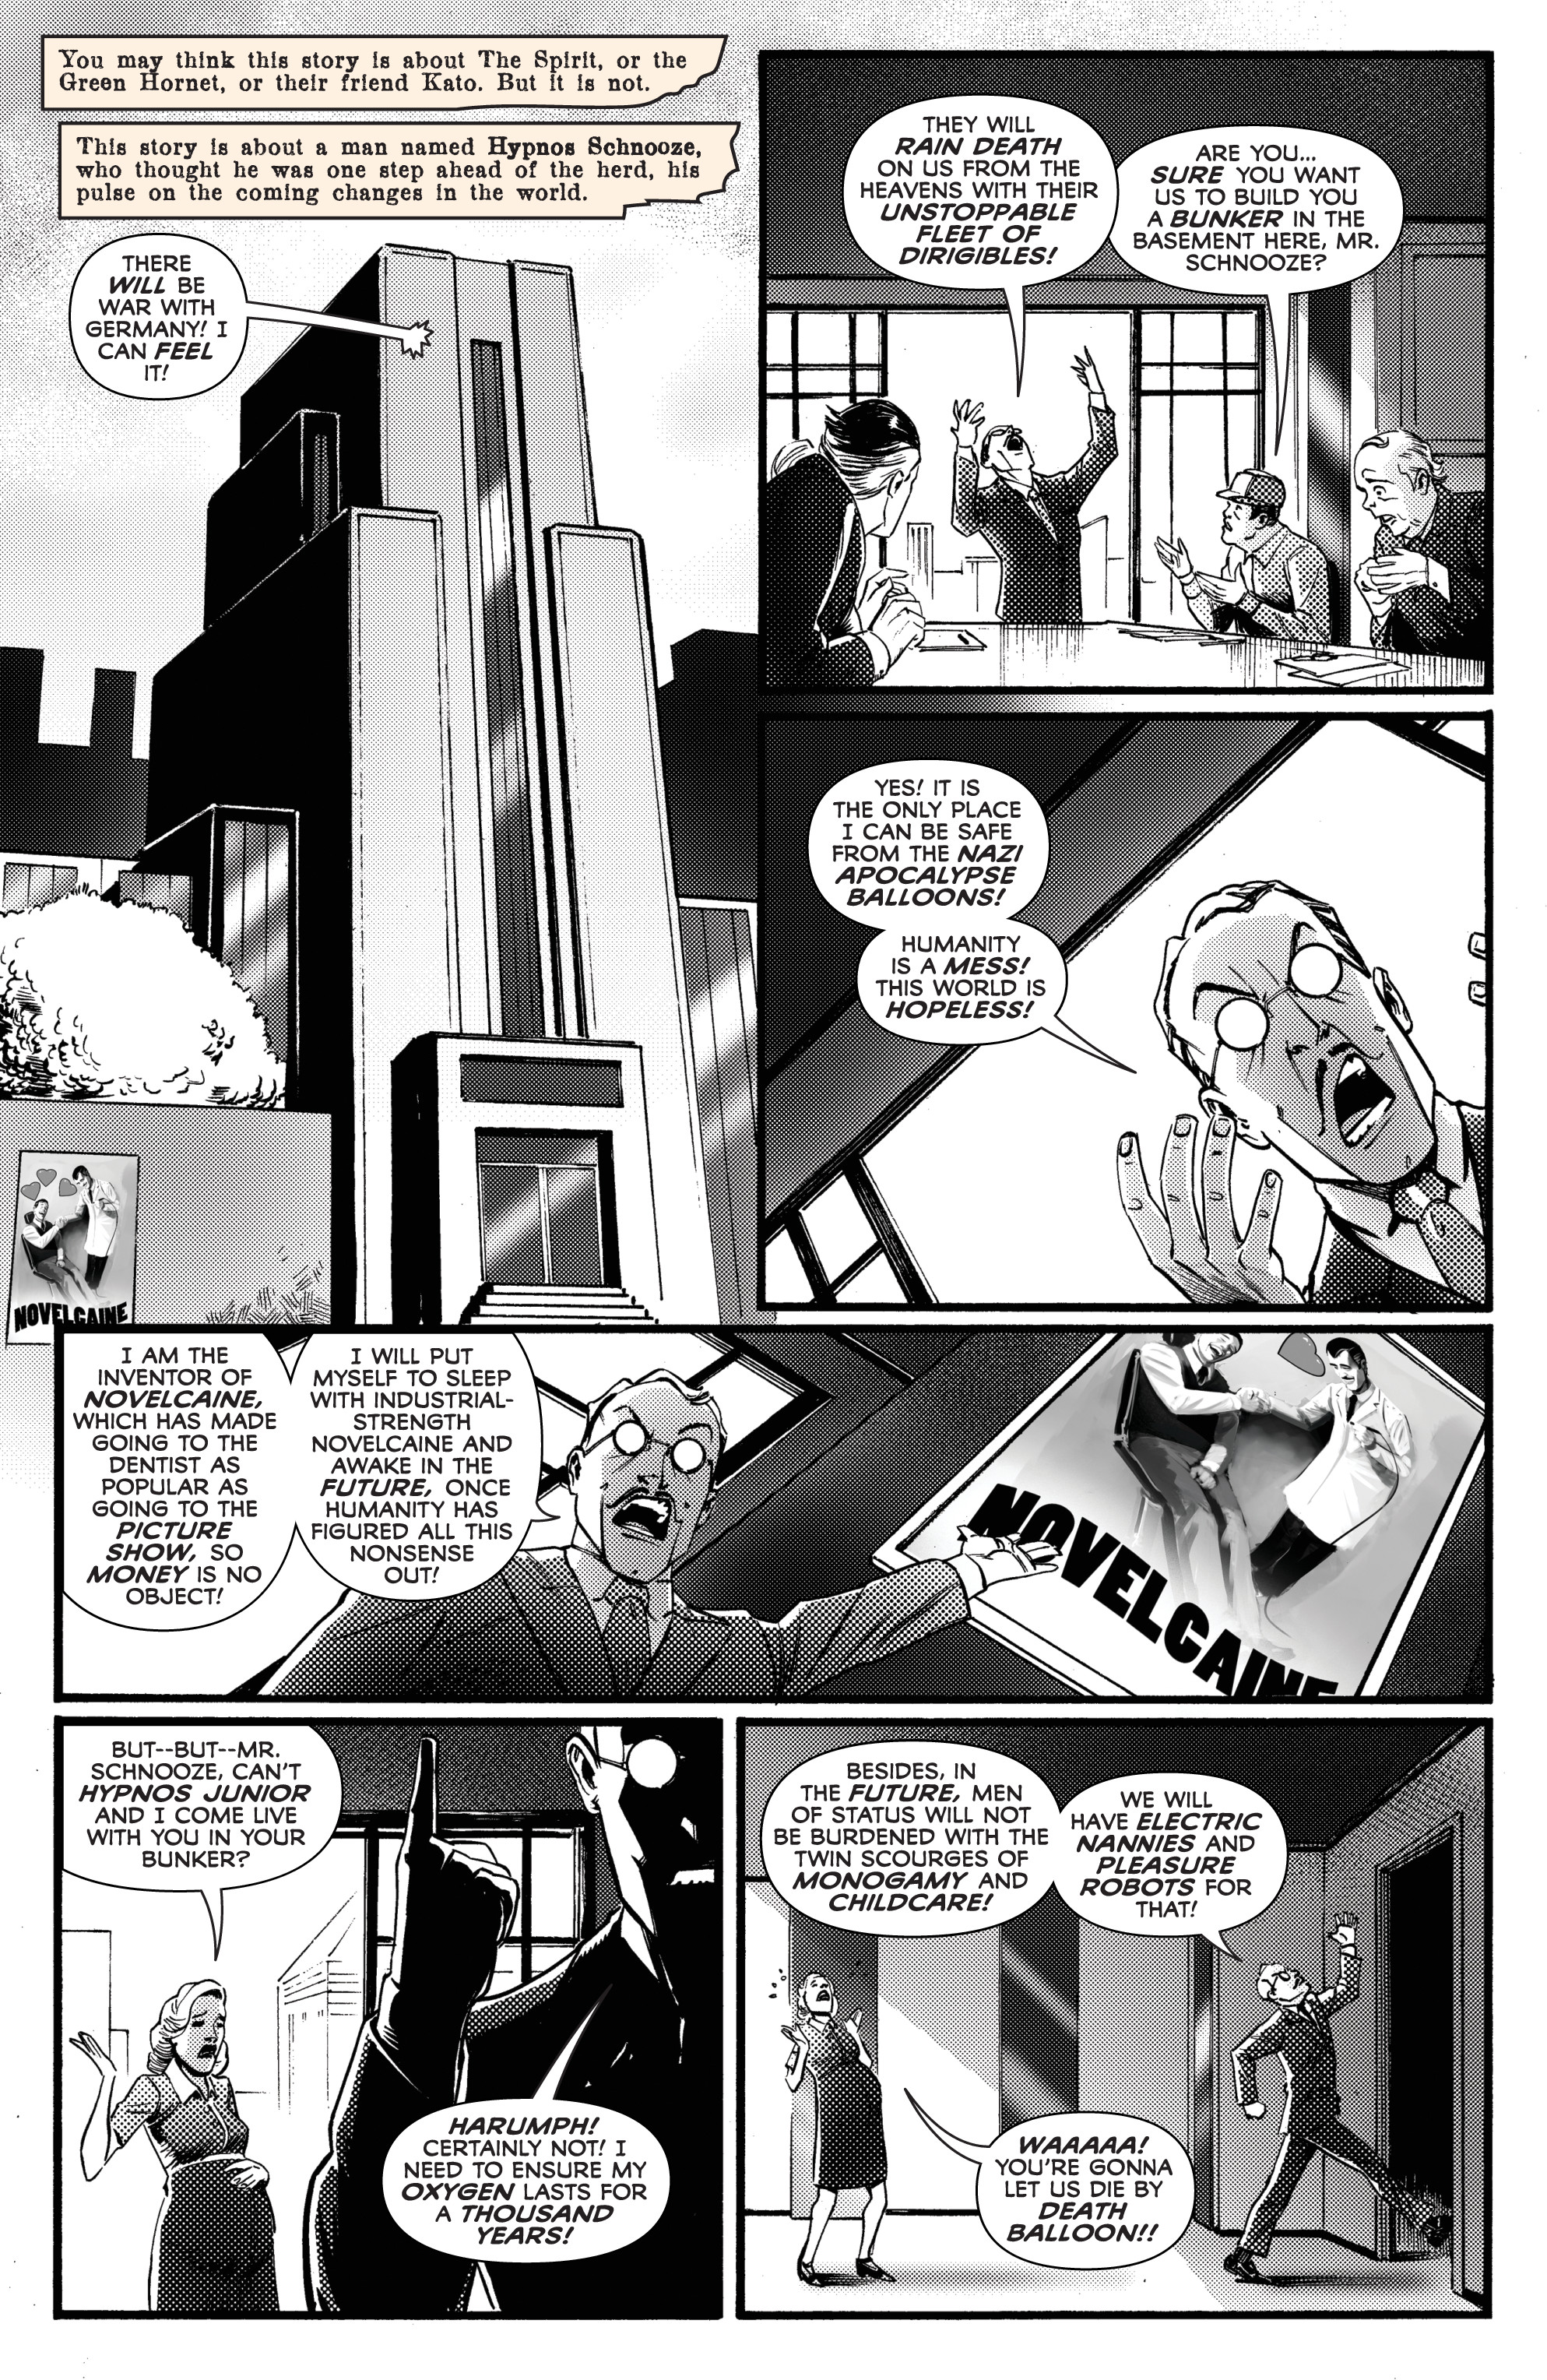 The Green Hornet '66 Meets The Spirit (2017): Chapter 2 - Page 3